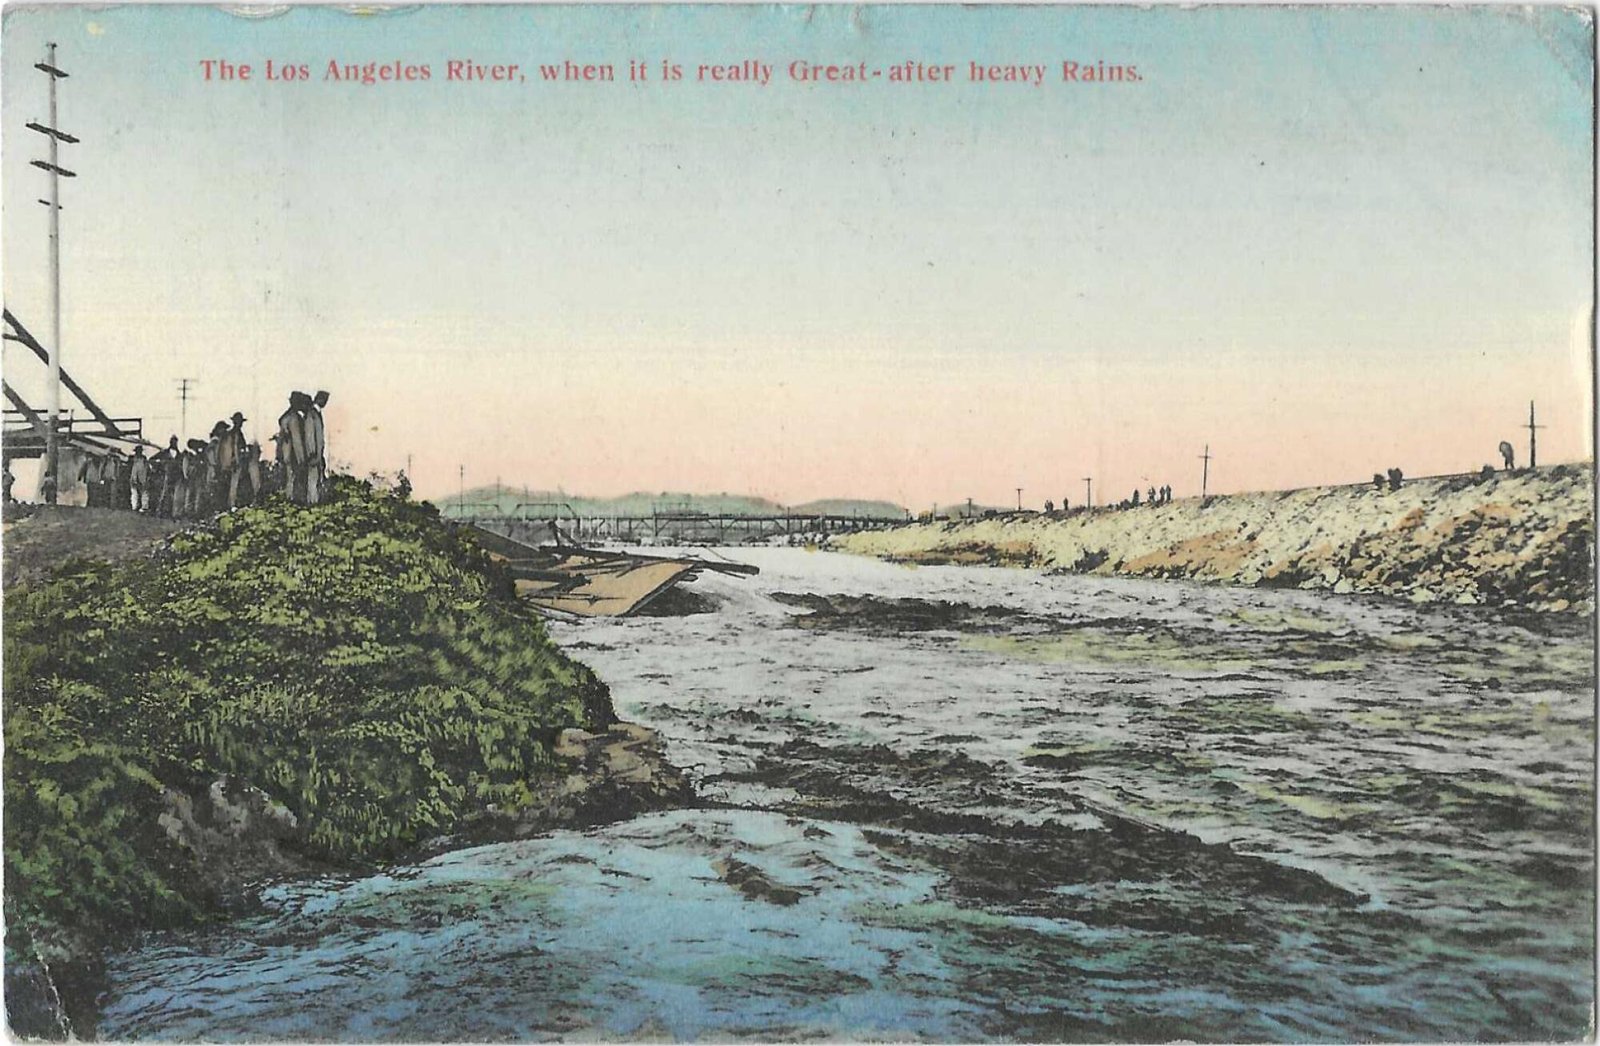 Water rushes in the L.A. River basin, with a bridge in the background and people on either bank.